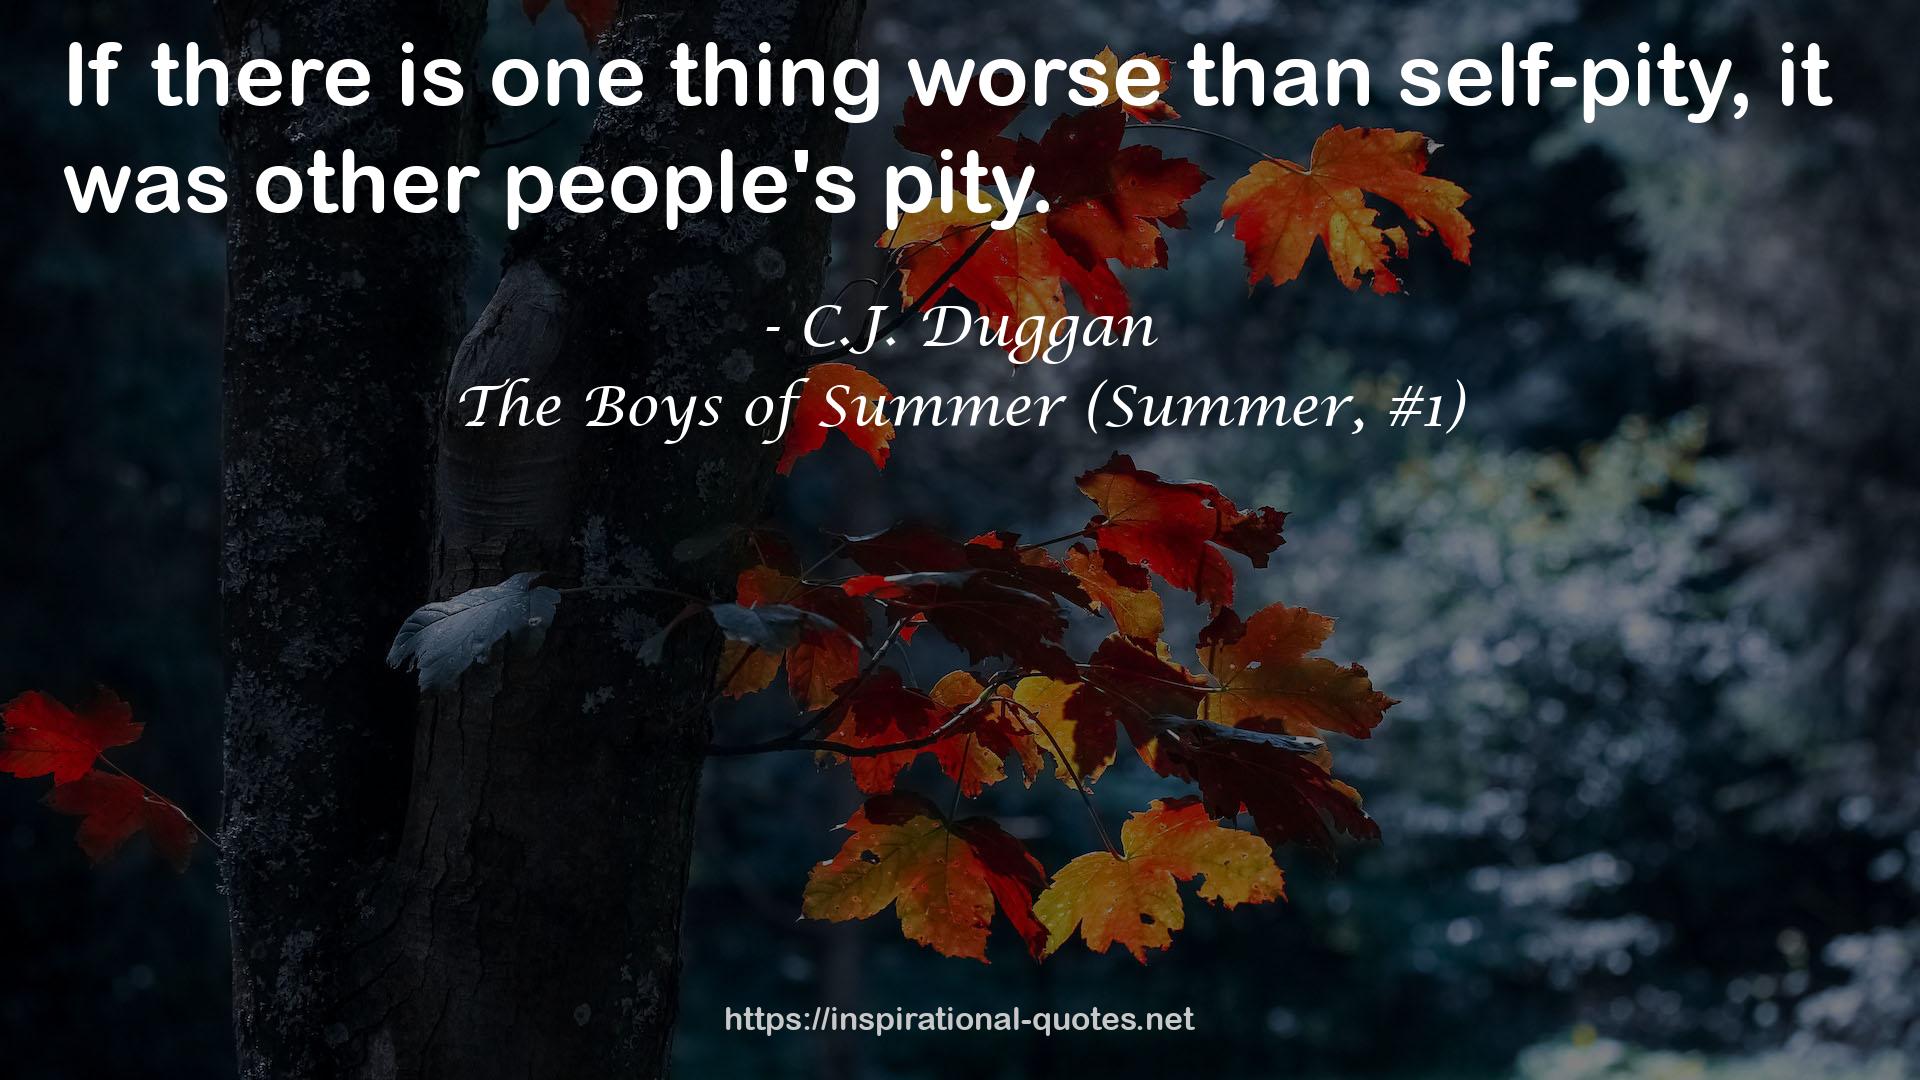 The Boys of Summer (Summer, #1) QUOTES